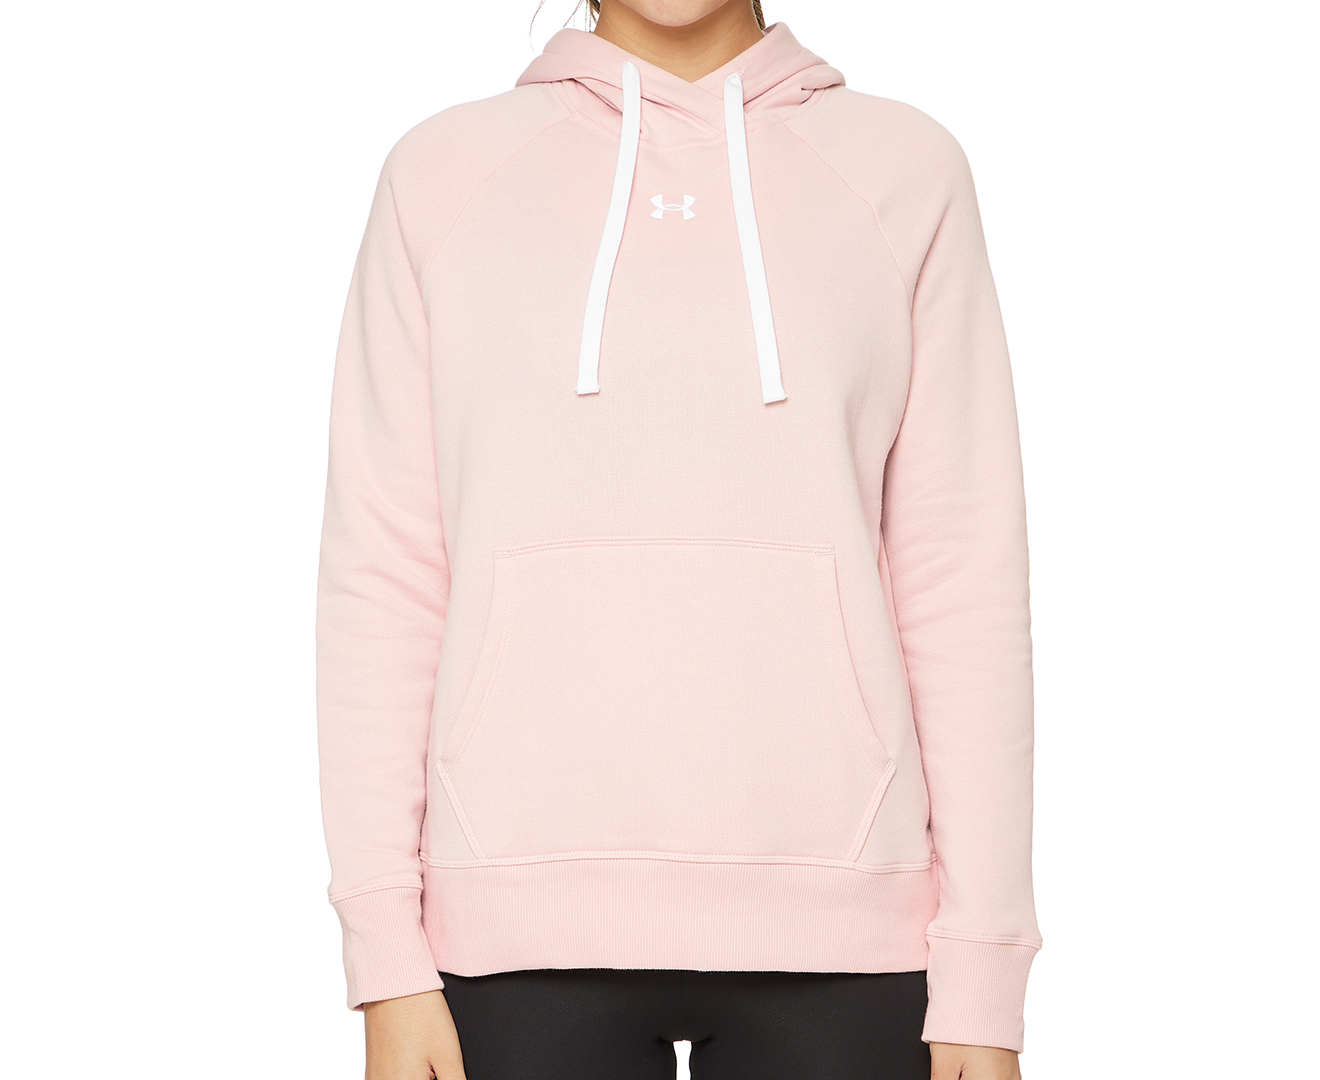 Under Armour Women'S Rival Fleece Hb Hoodie Pink Small 